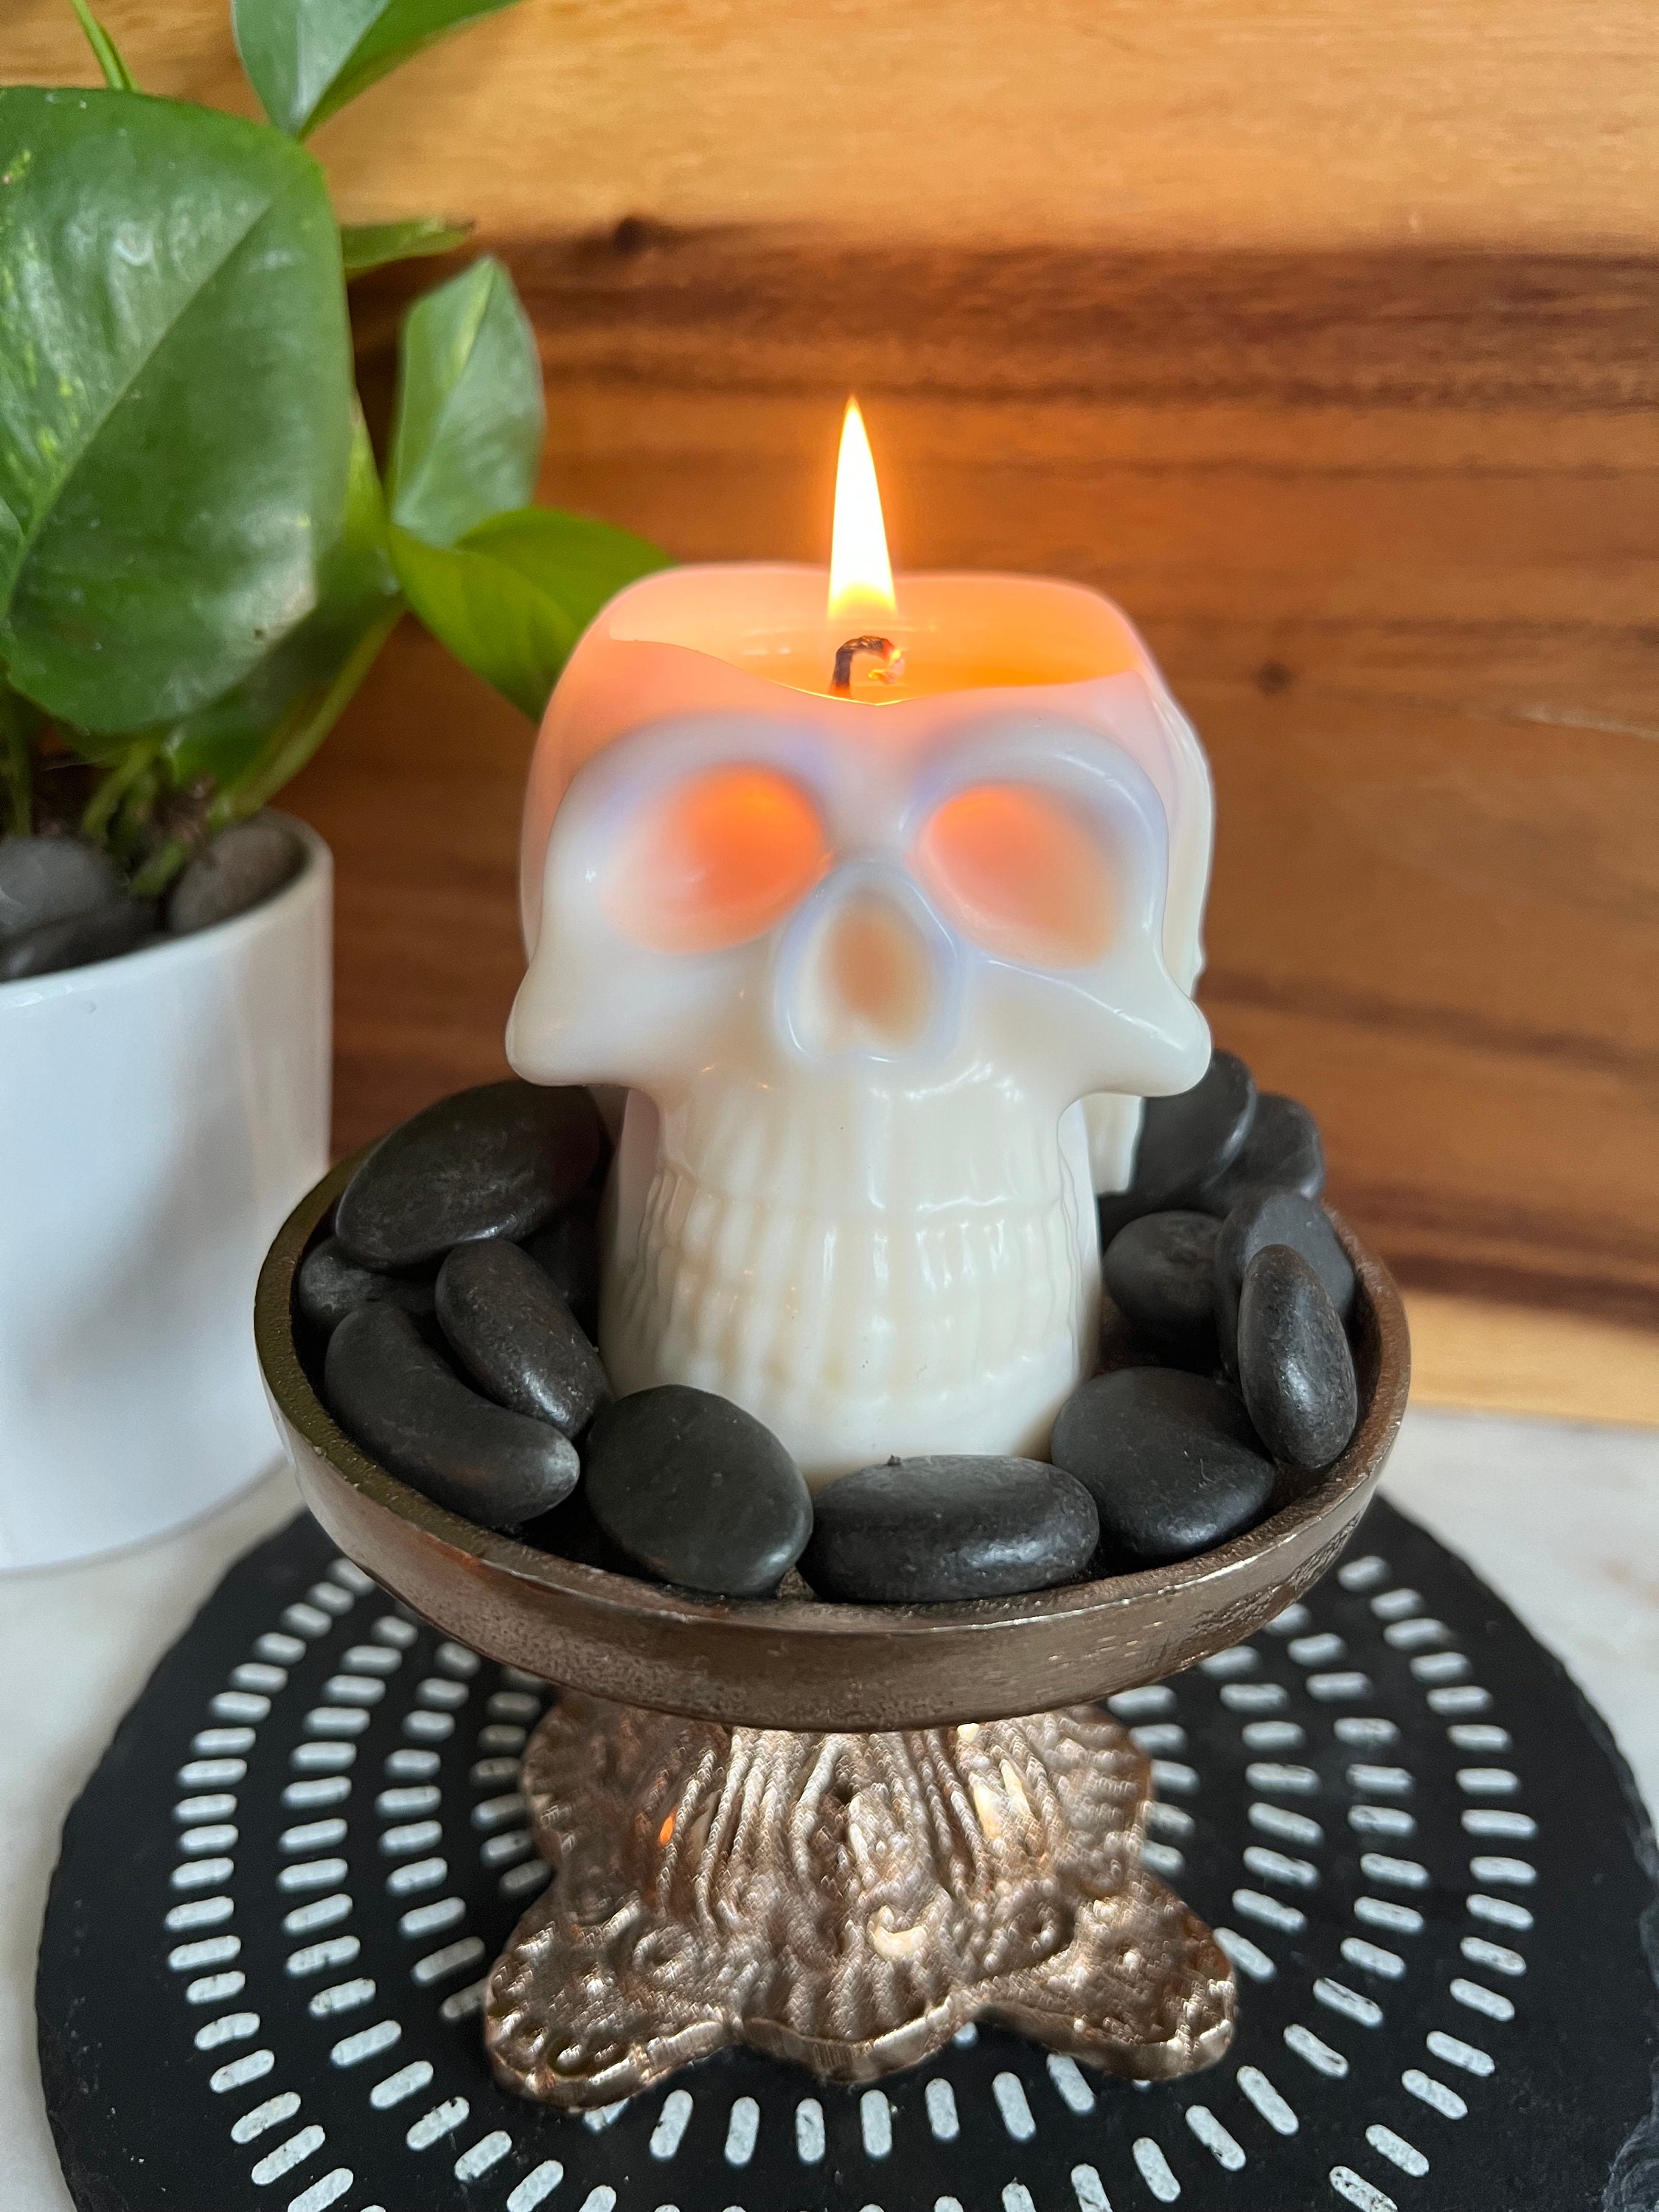 Custom Creative Halloween Home Decoration Candle White Black Skulls Shaped  Paraffin Wax Candle - China Candle and Scented Candle price